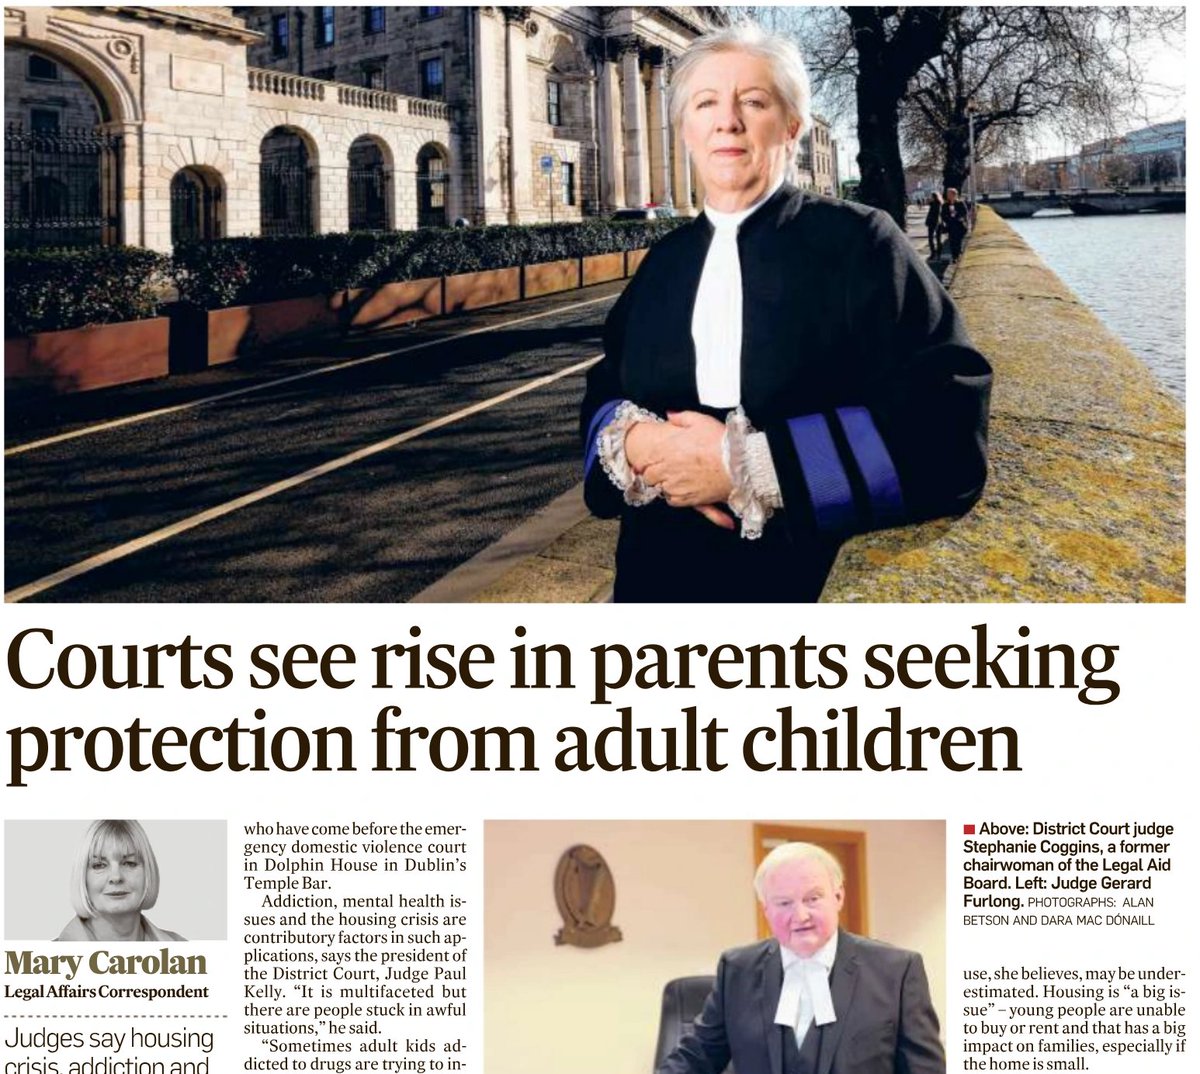 .@MaryCarolanIT outlines the harrowing & acute need of parents for emergency access to the District Court. Notwithstanding an increase in judges; the demand continues to rise due to complex reasons of housing, mental health, violence & substance abuse. We say: transferring an